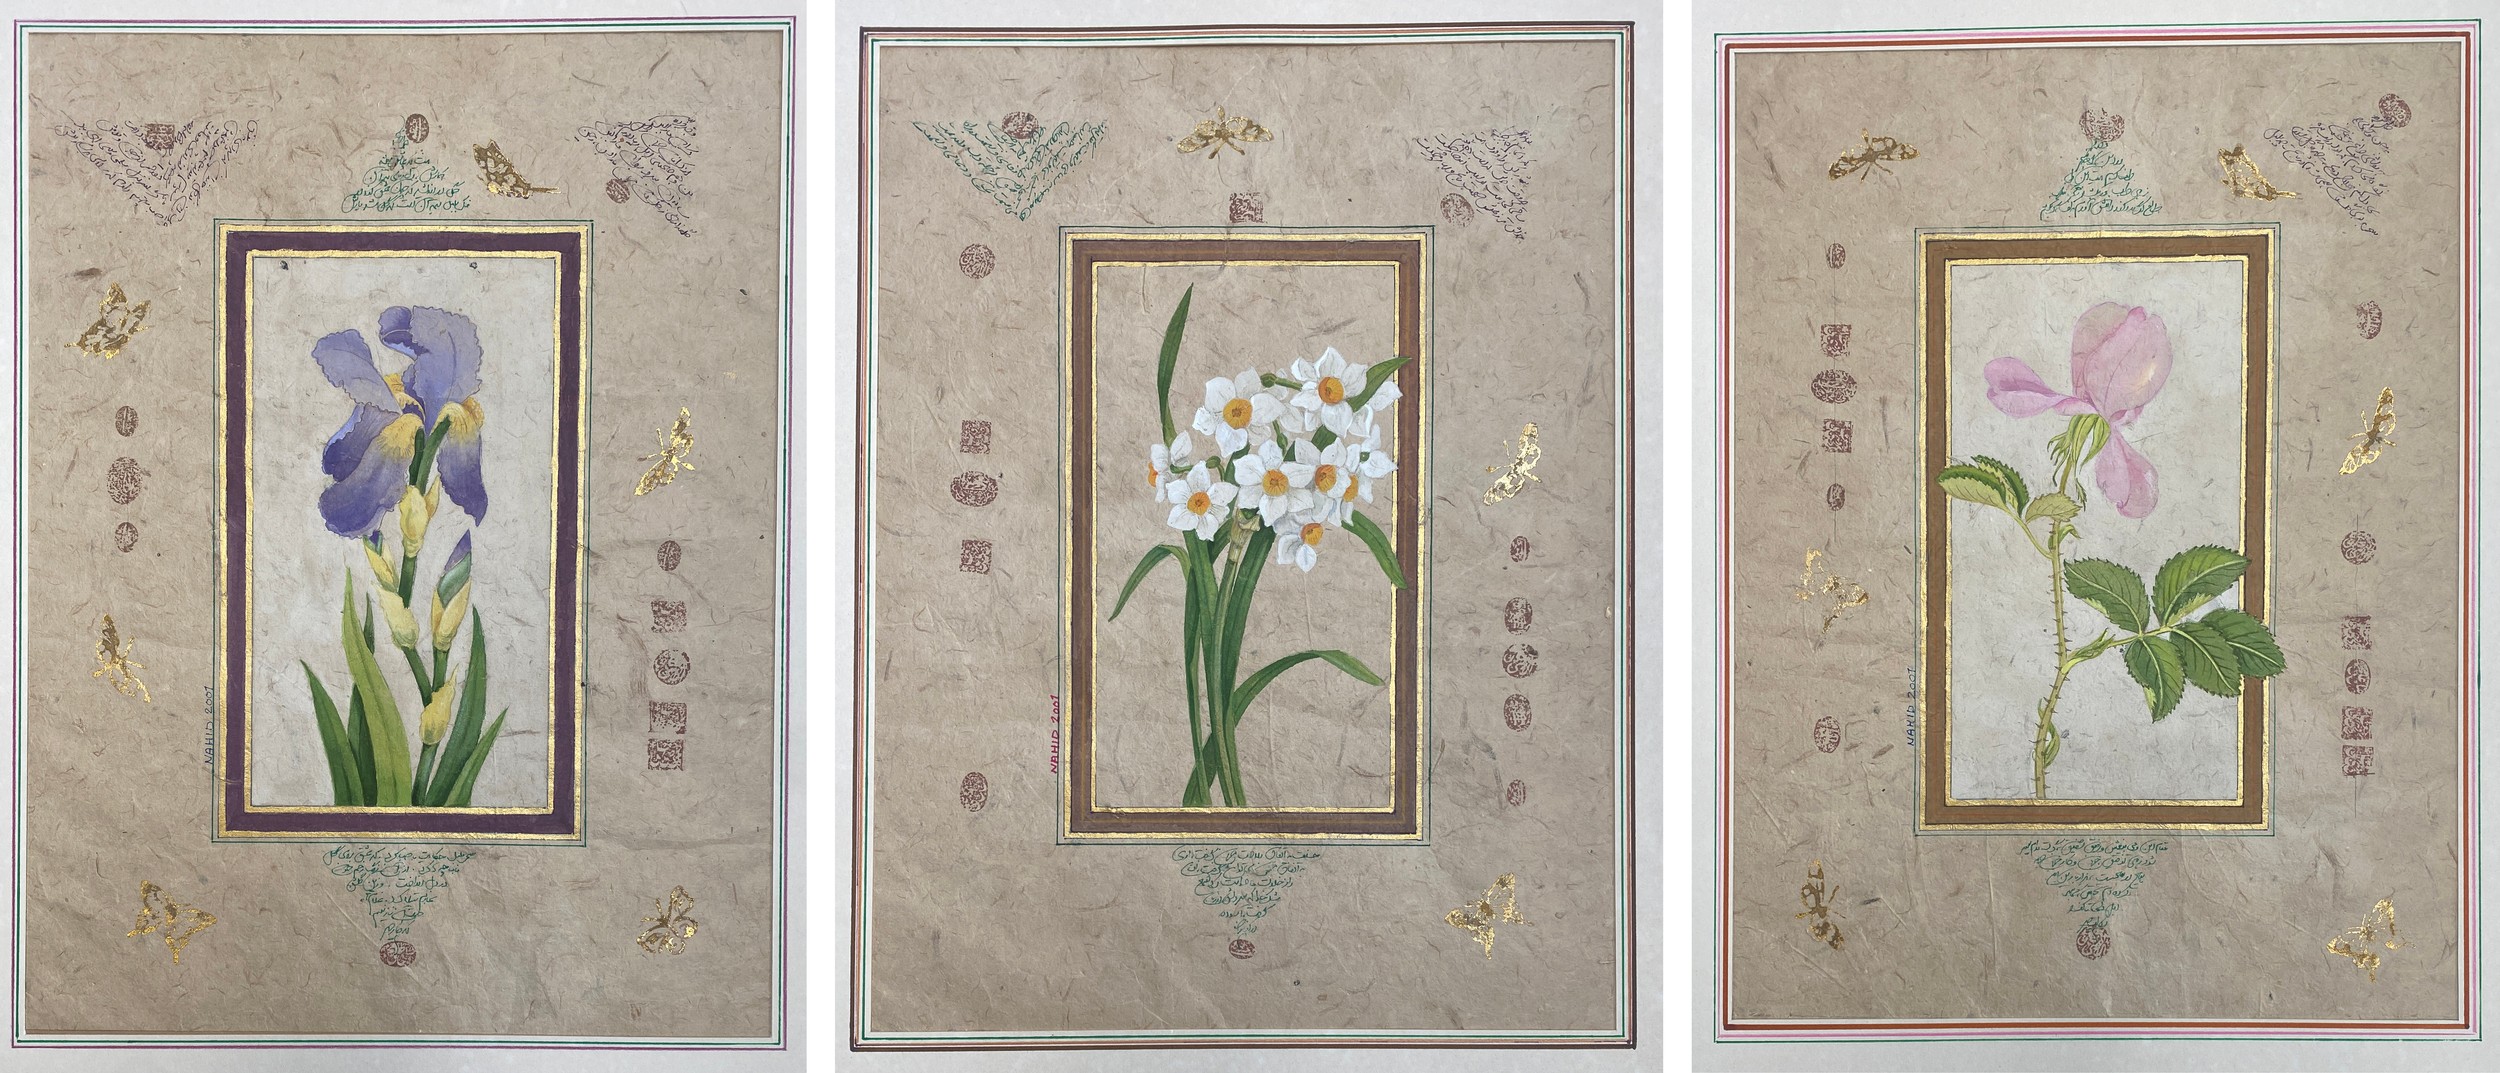 A set of three gouache floral studies within gilt borders with Arabic inscription, signed Nahid